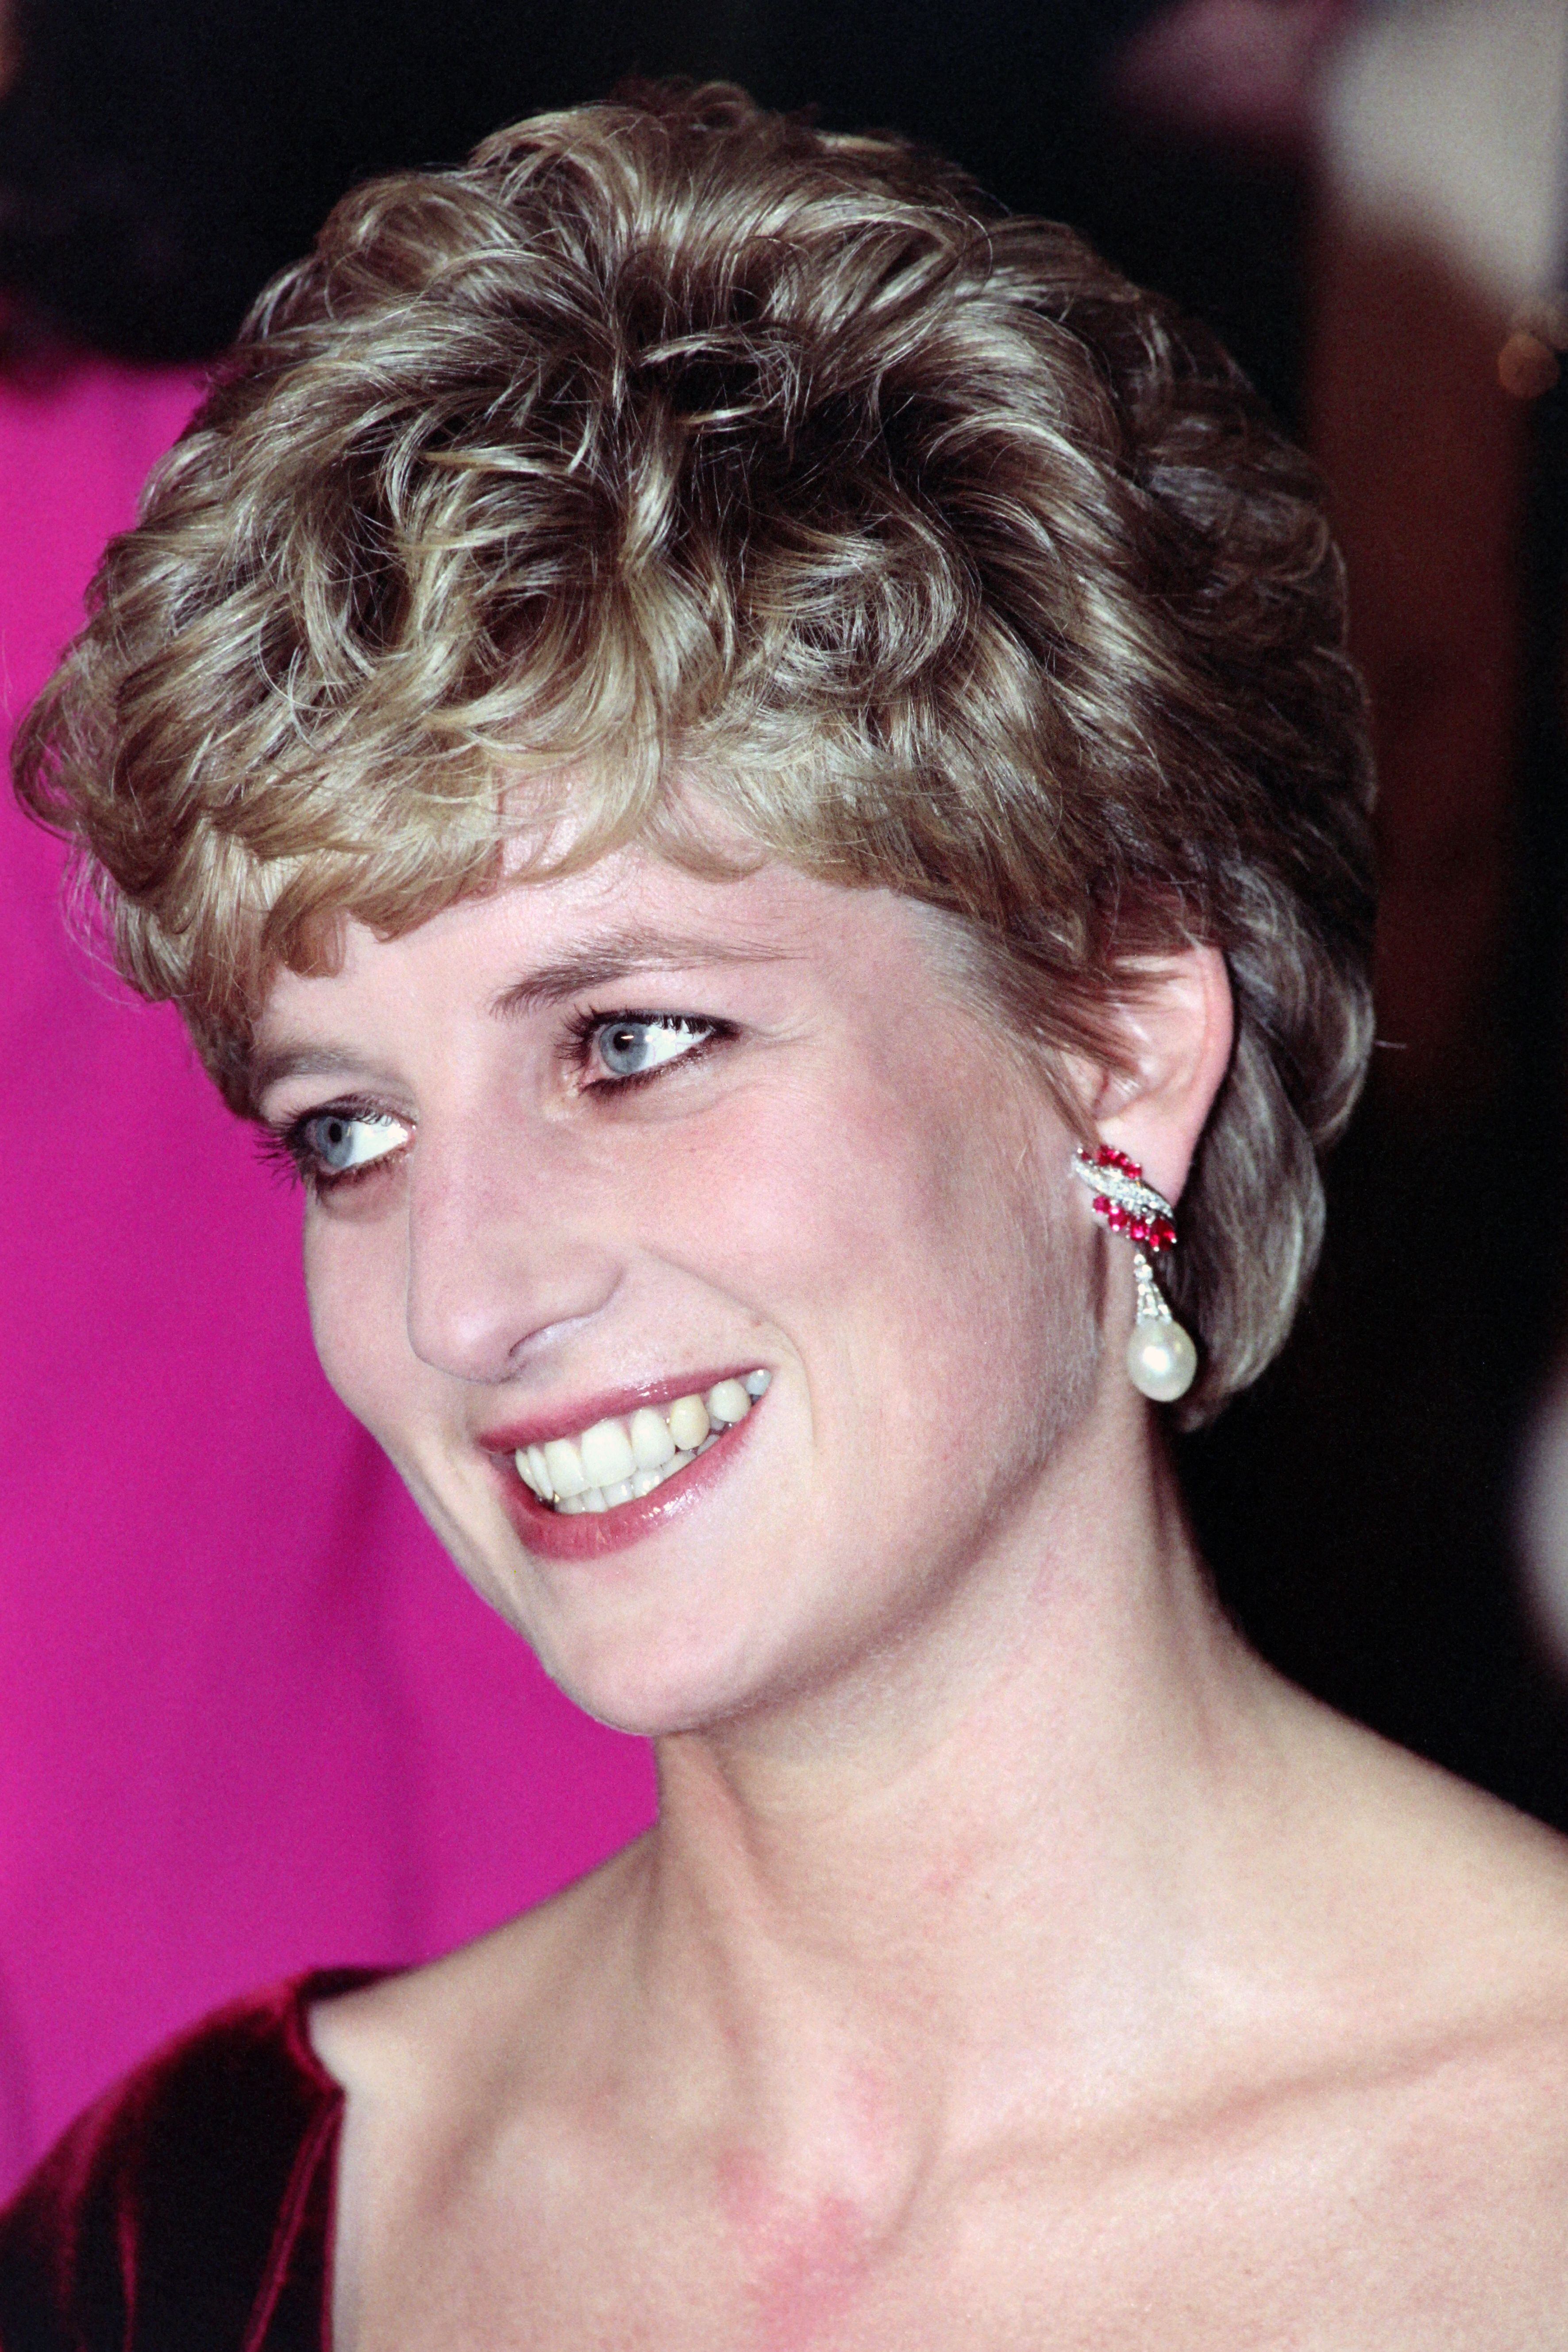 The Princess of Wales, Diana, before an Oratorio concert 